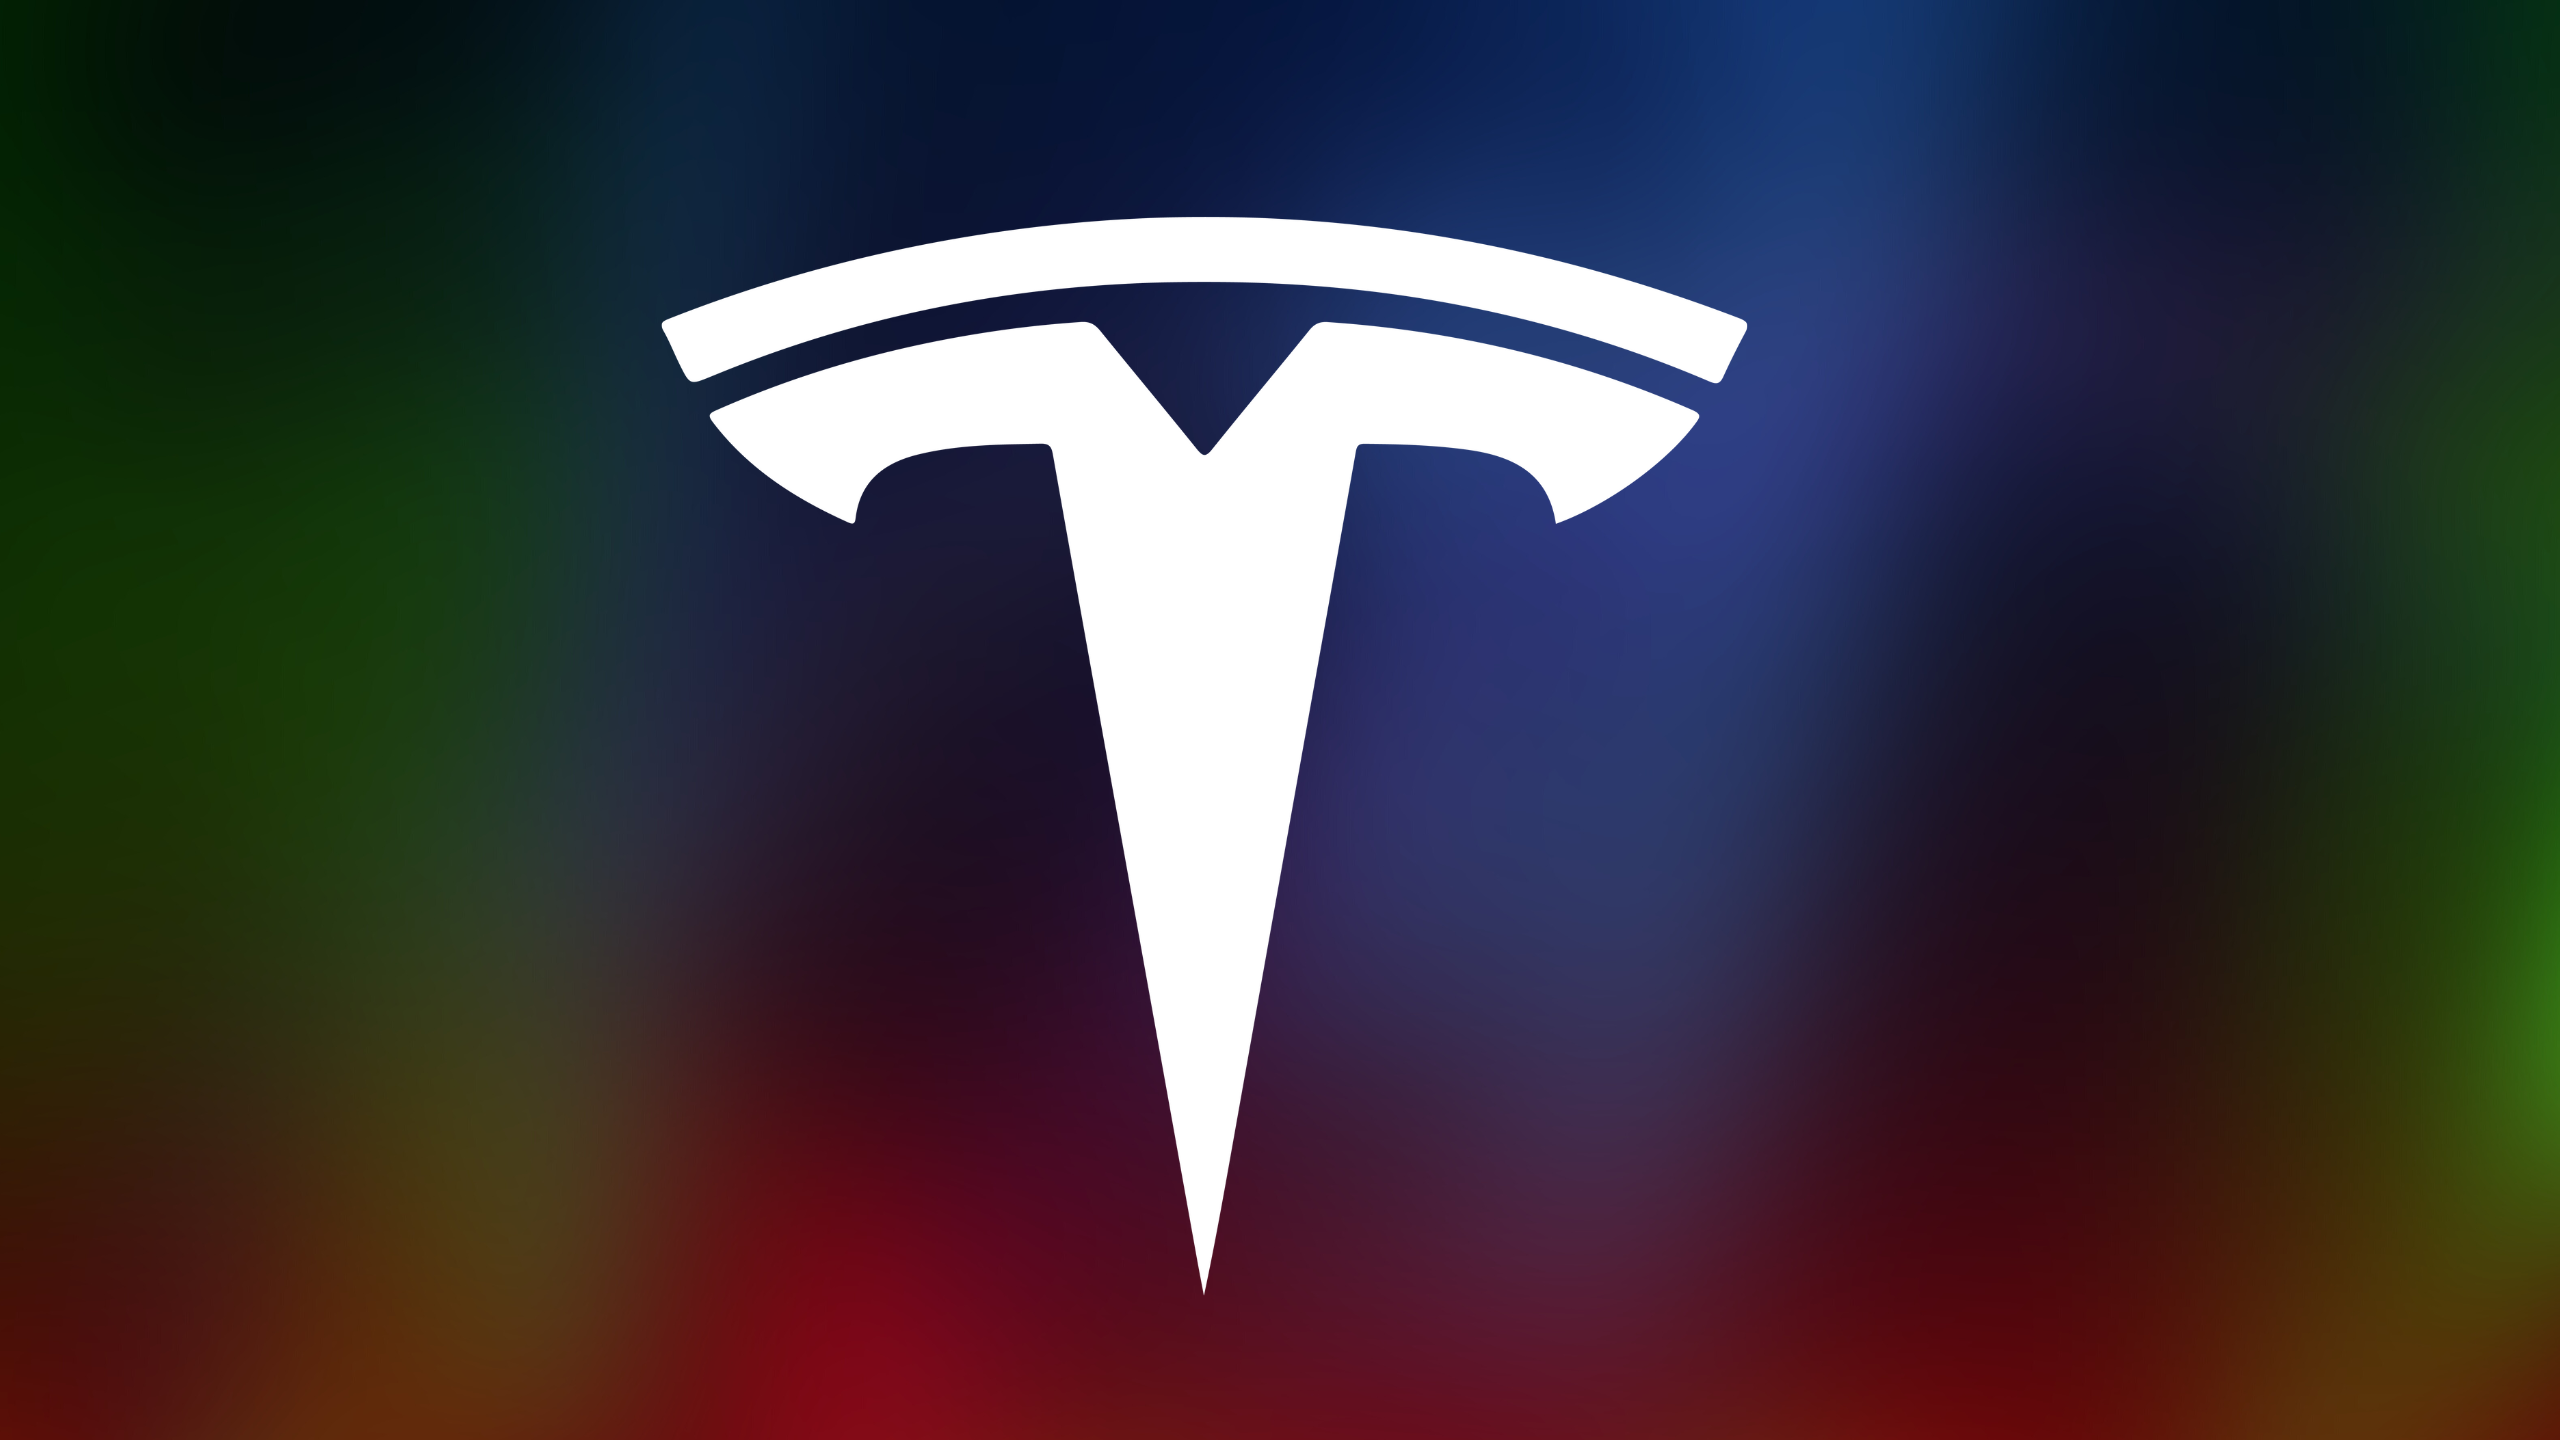 Tesla stock narrowly misses losing streak record aided by China sales